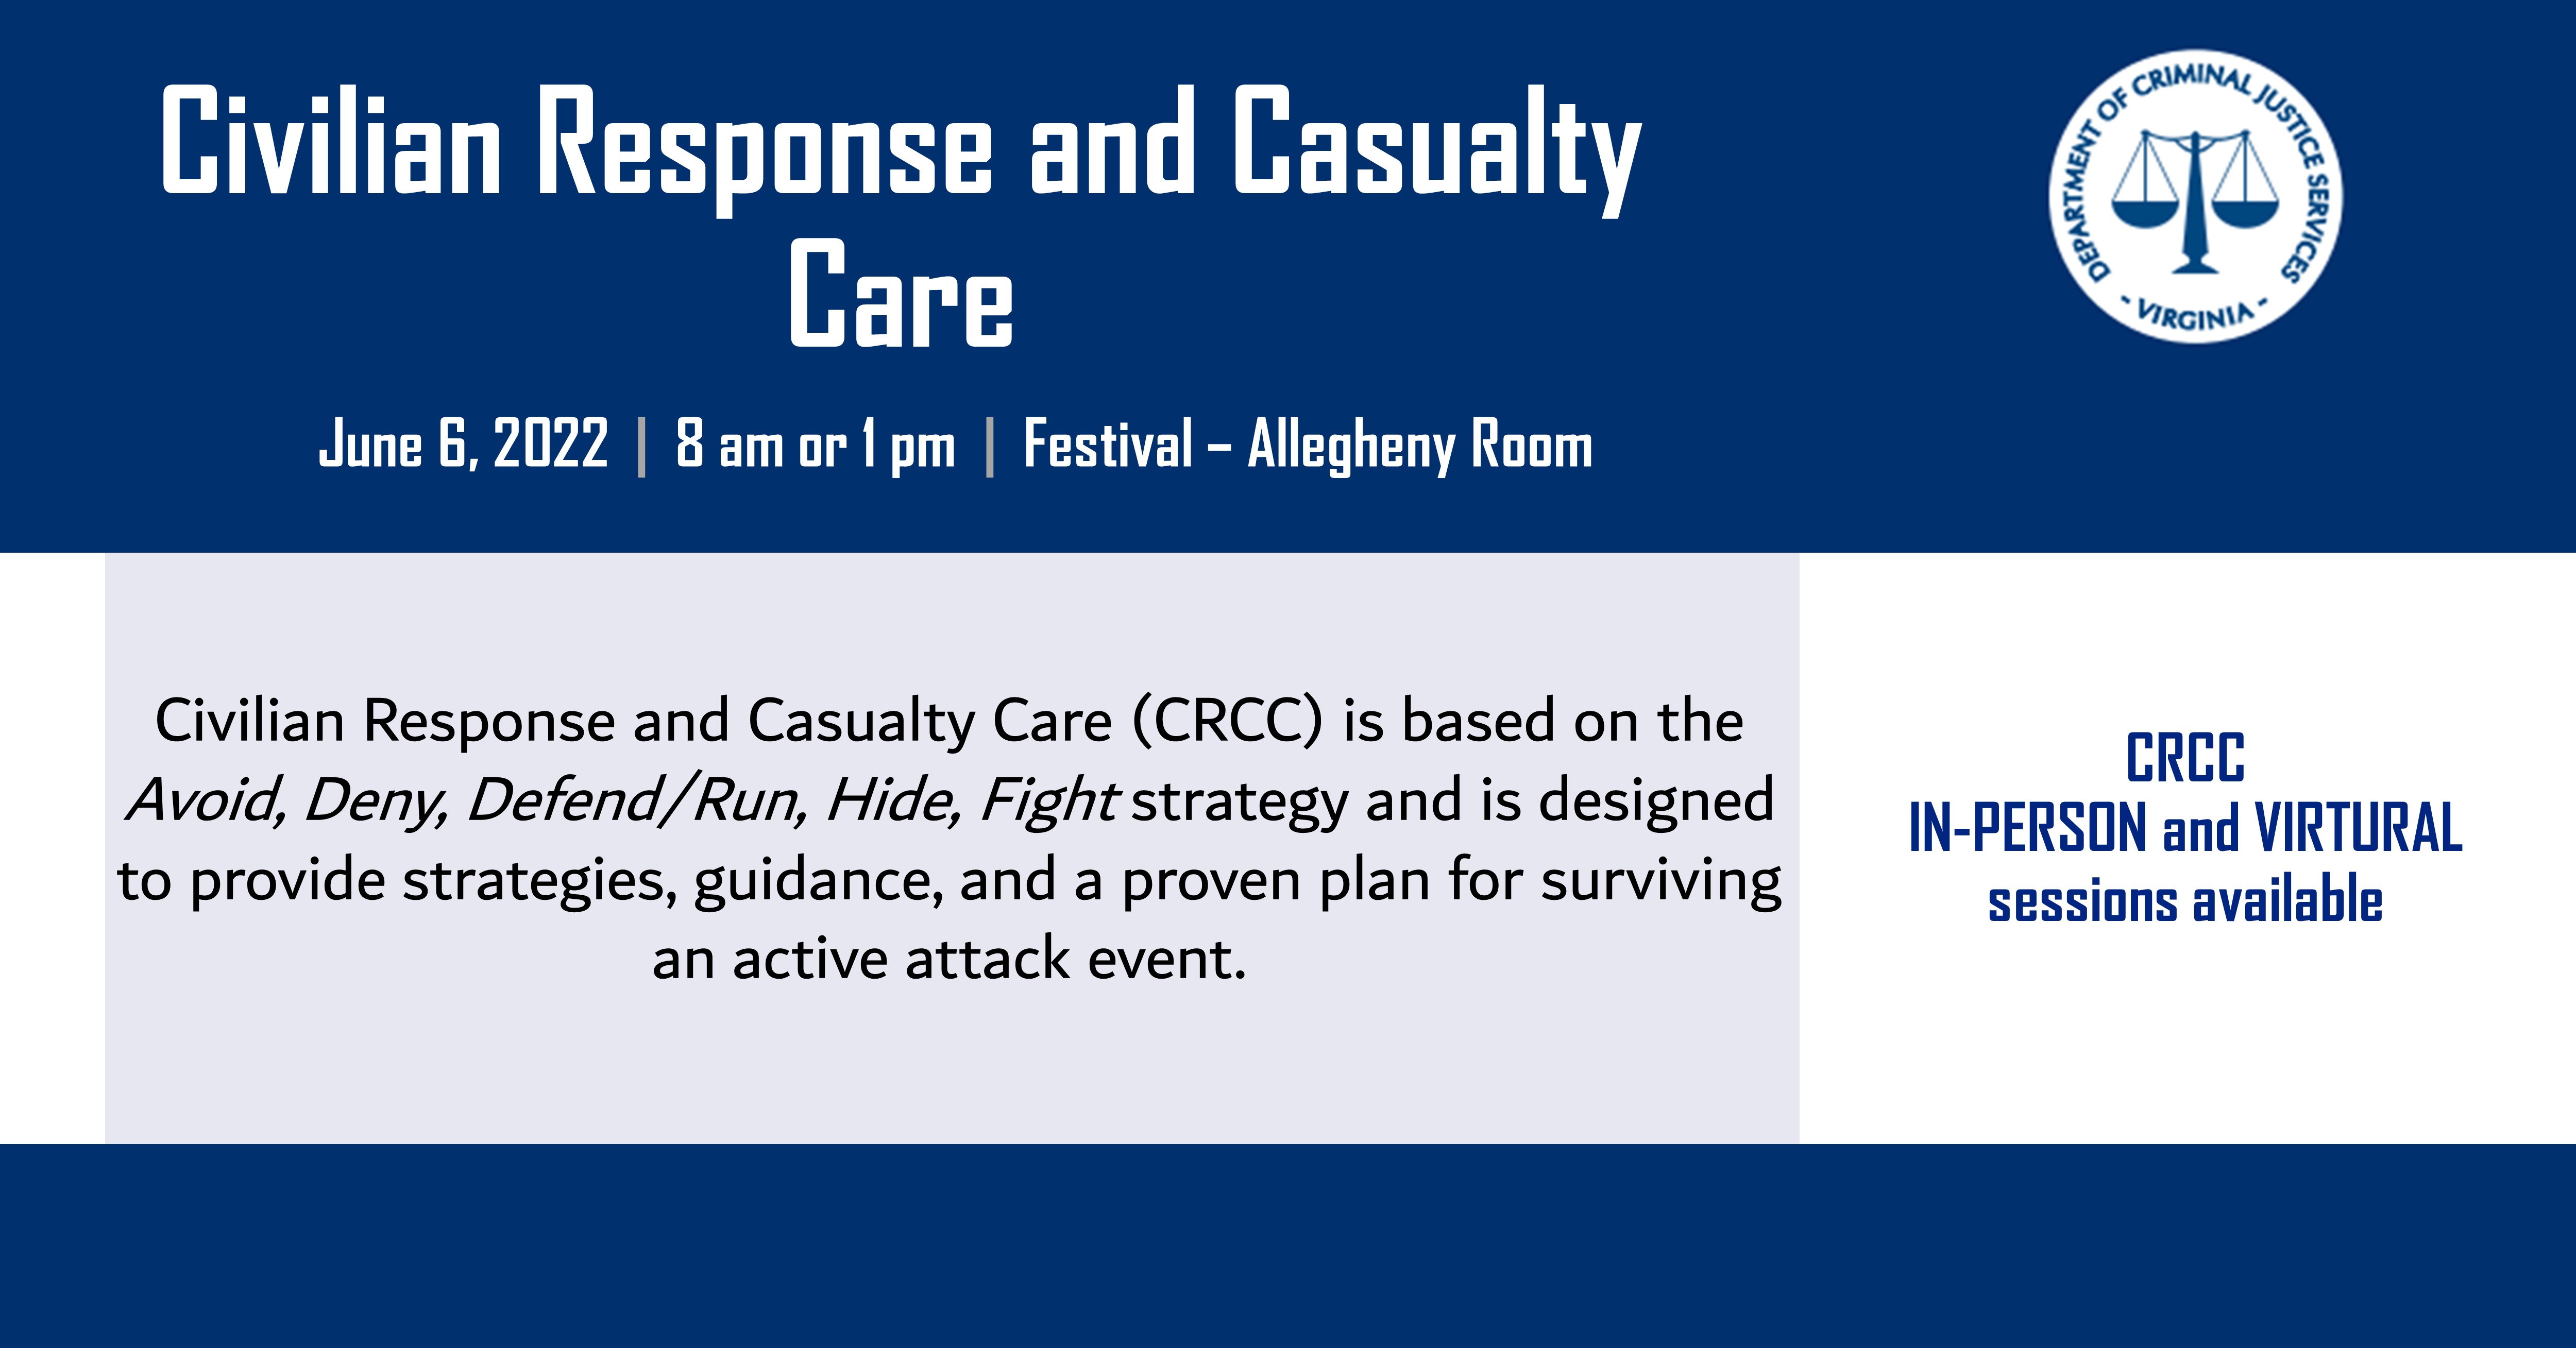 Register for the Civilian response and casualty care event